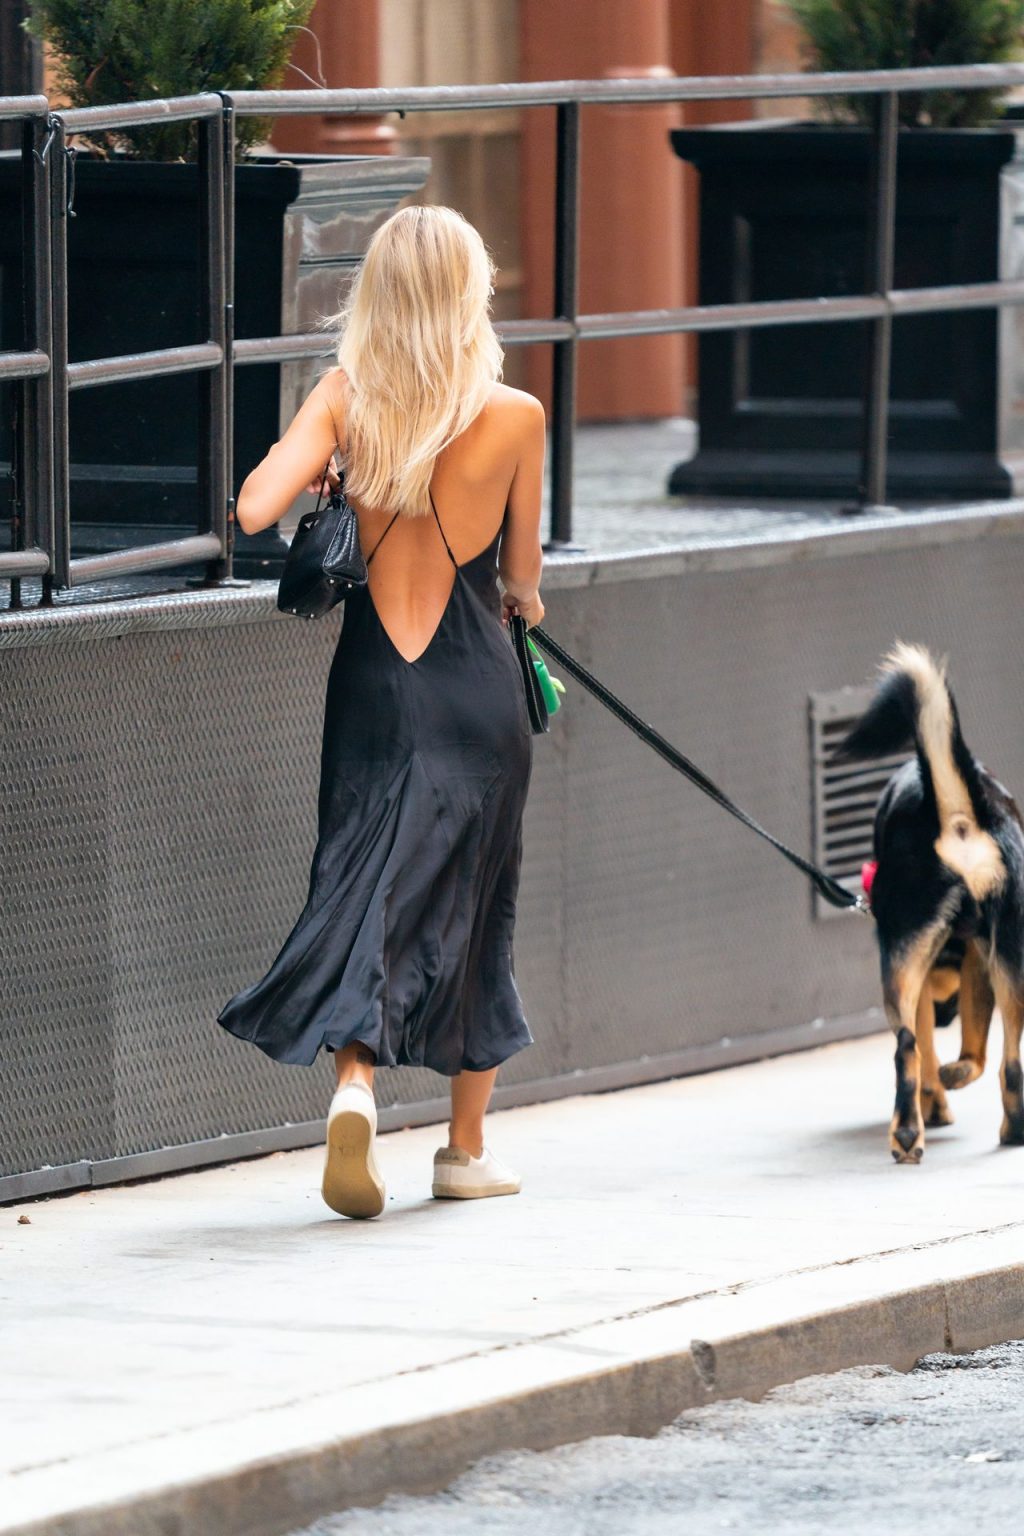 Emily Ratajkowski is Pictured Walking Her Dog Colombo in NYC (25 Photos)